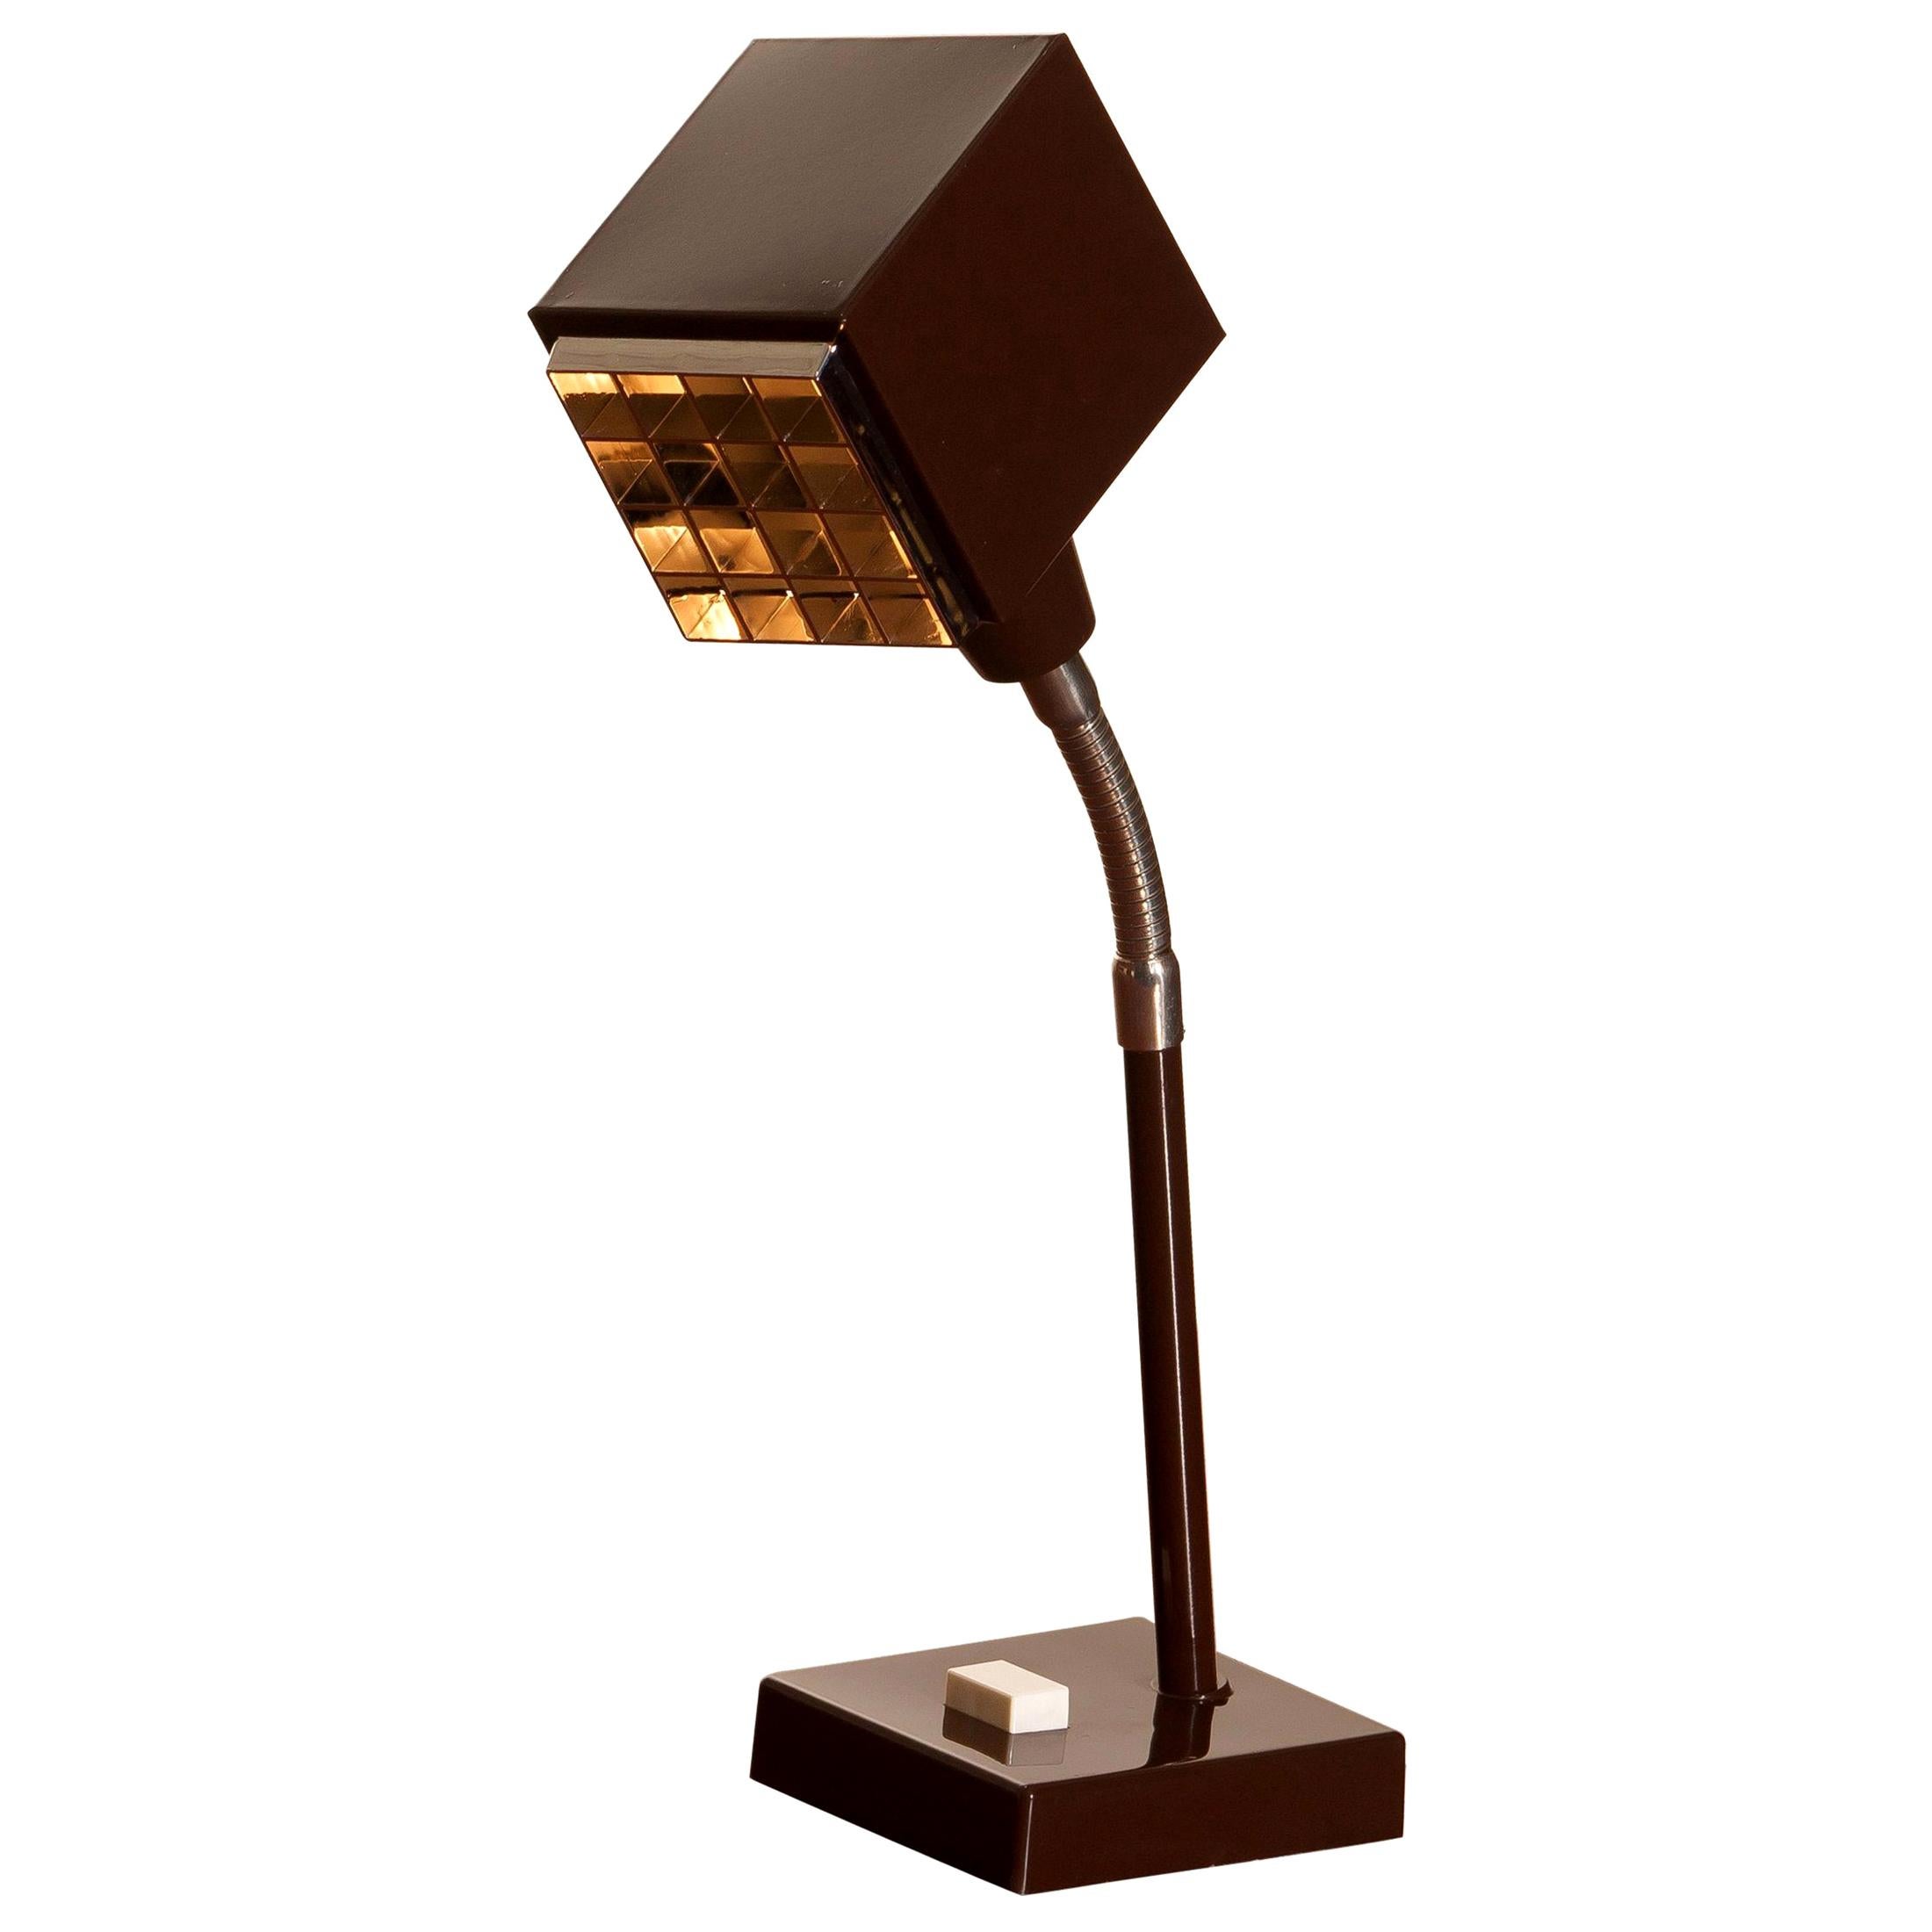 Desk lamp in dark brown metal and designed by Hans-Anne Jakobsson for Elidus.
The famous 